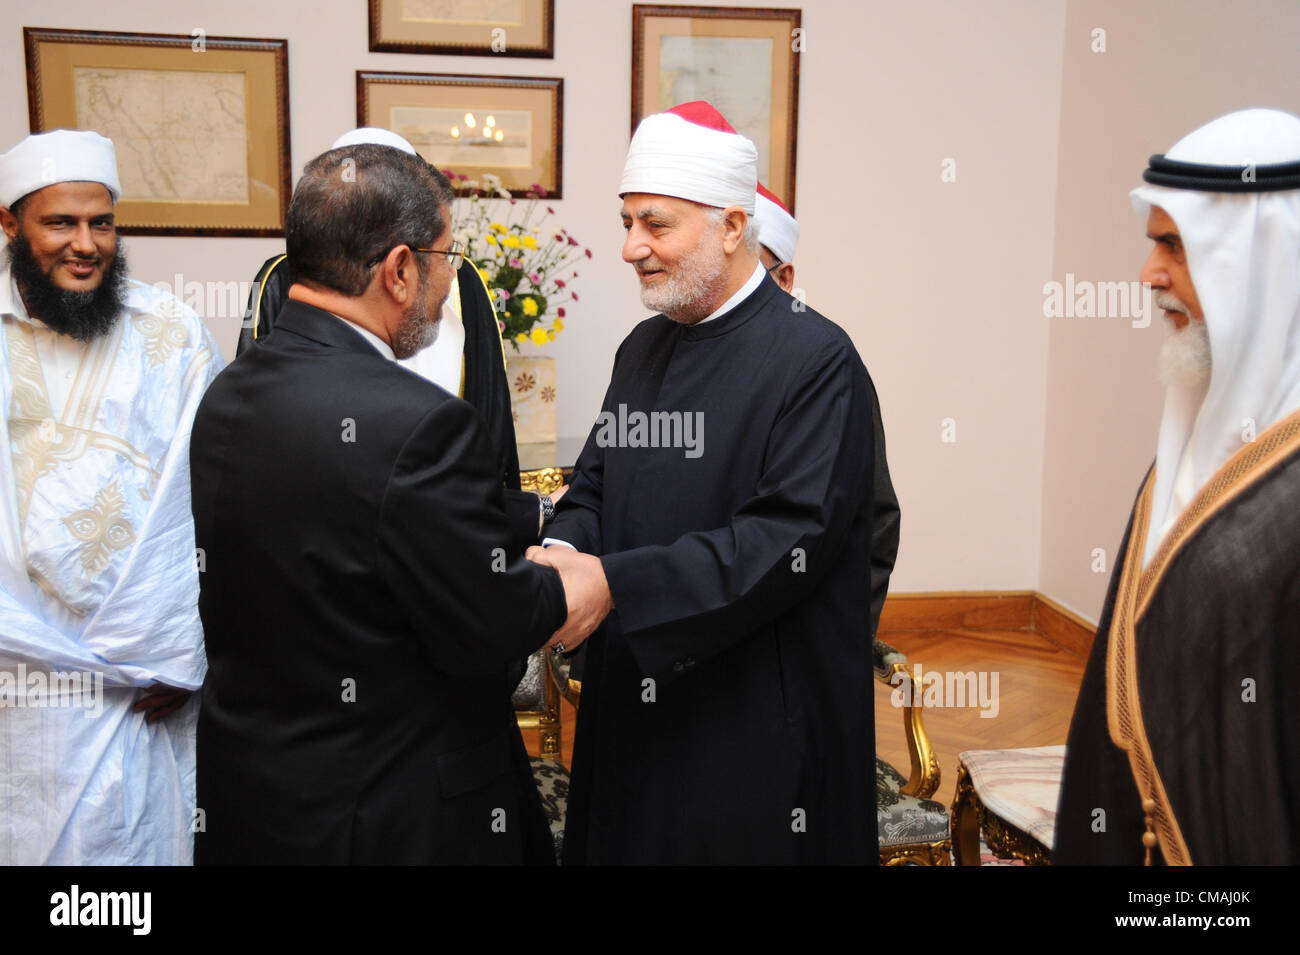 4 July 2012 -- Cairo, Egypt -- Egypt's newly elected President Mohamed Morsi meets Doha based Egyptian Islamist Youssef El Qaradawi and other Islamists, at the Presidential Palace. (Pool/ARE Presidency/Handout) Stock Photo